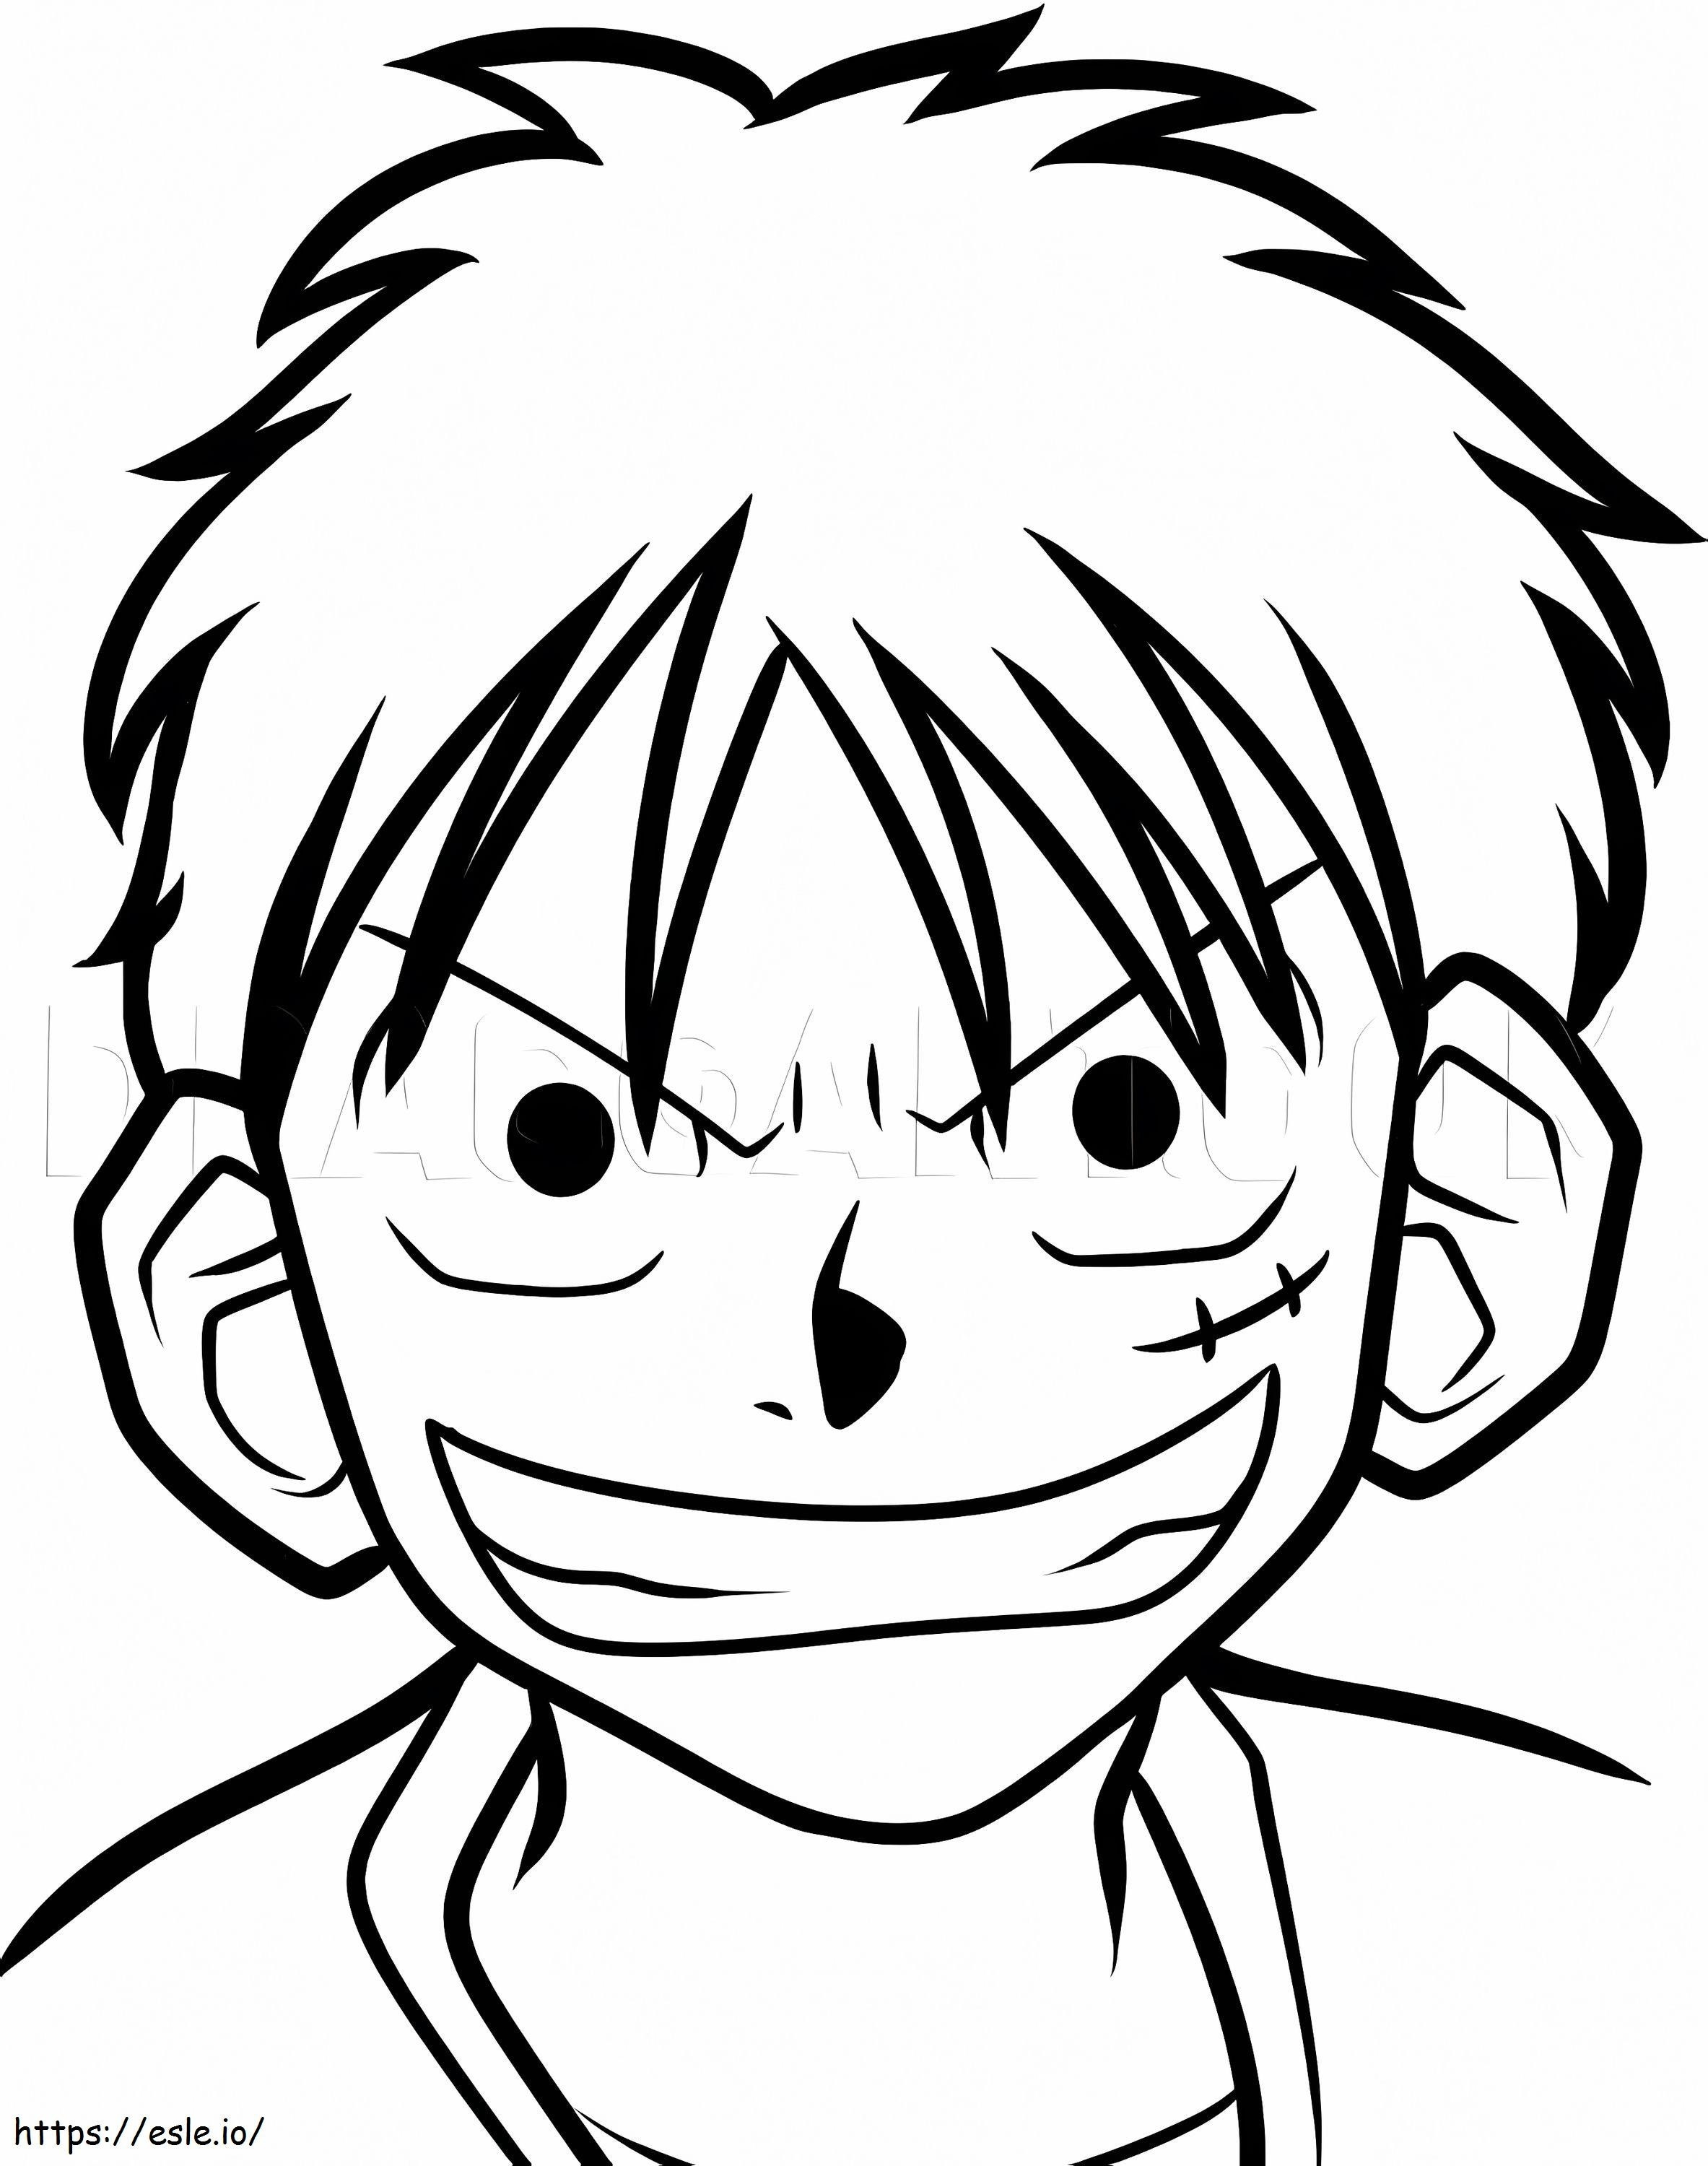 Smiling Luffy coloring page